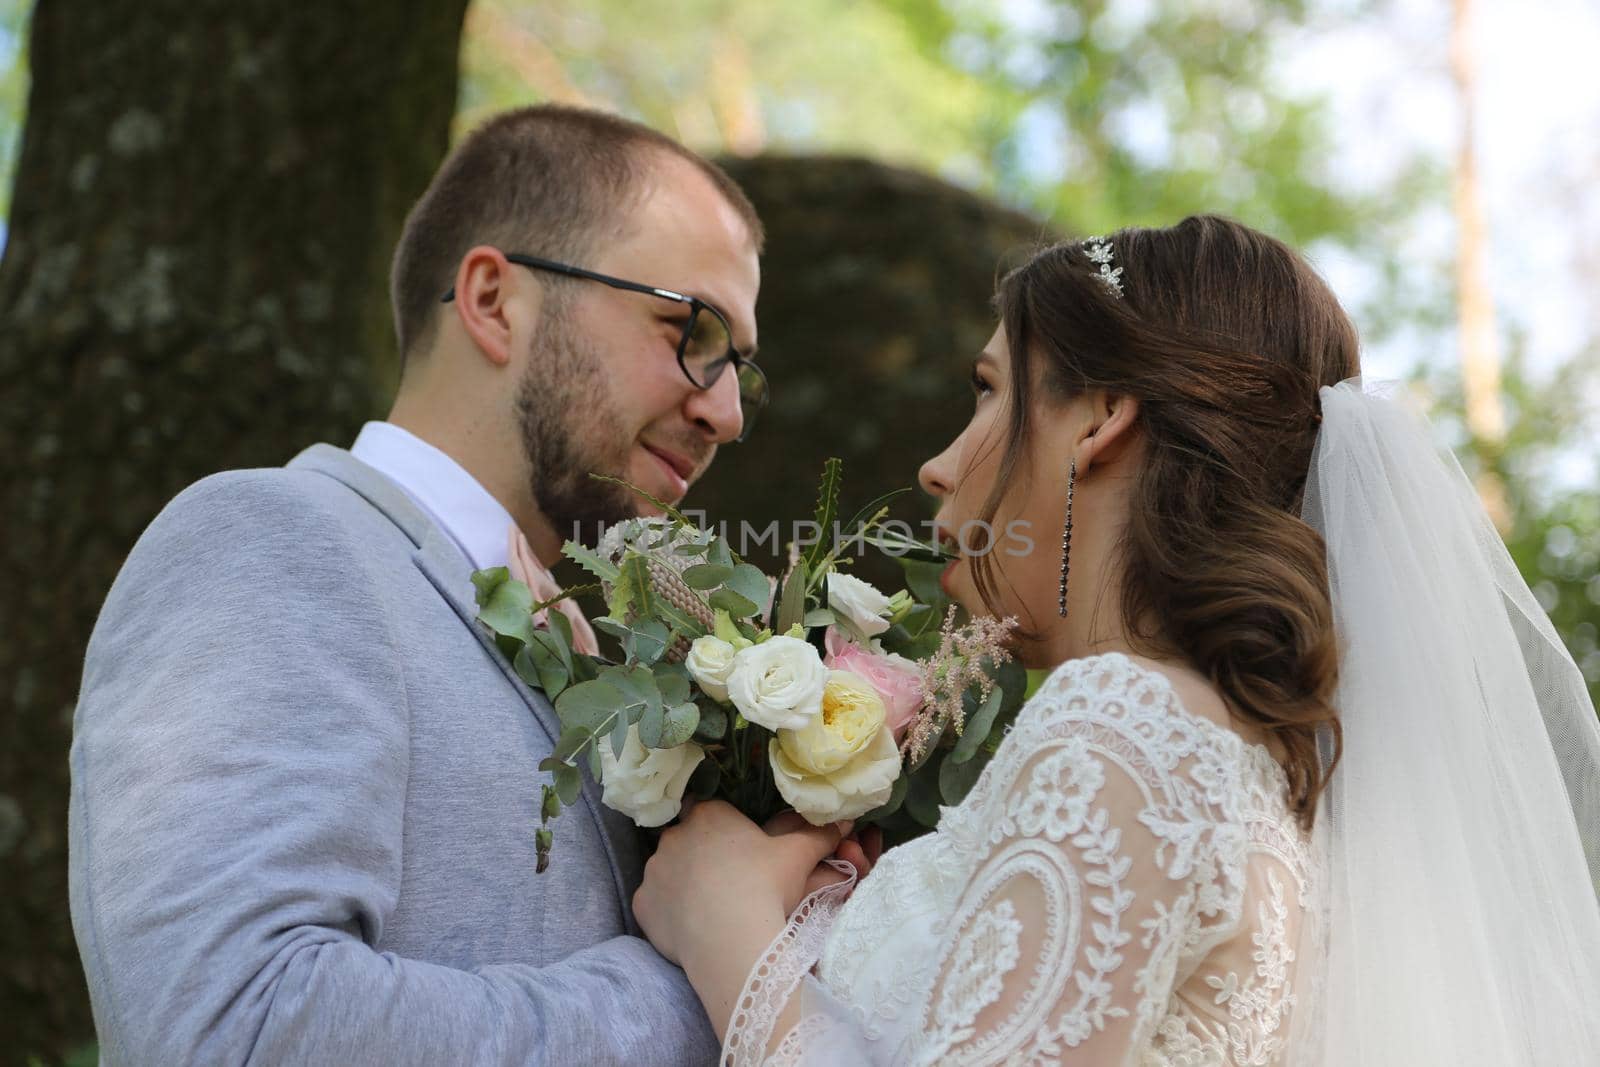 Wedding photo of the bride and groom in a gray-pink color on nature in the forest and rocks